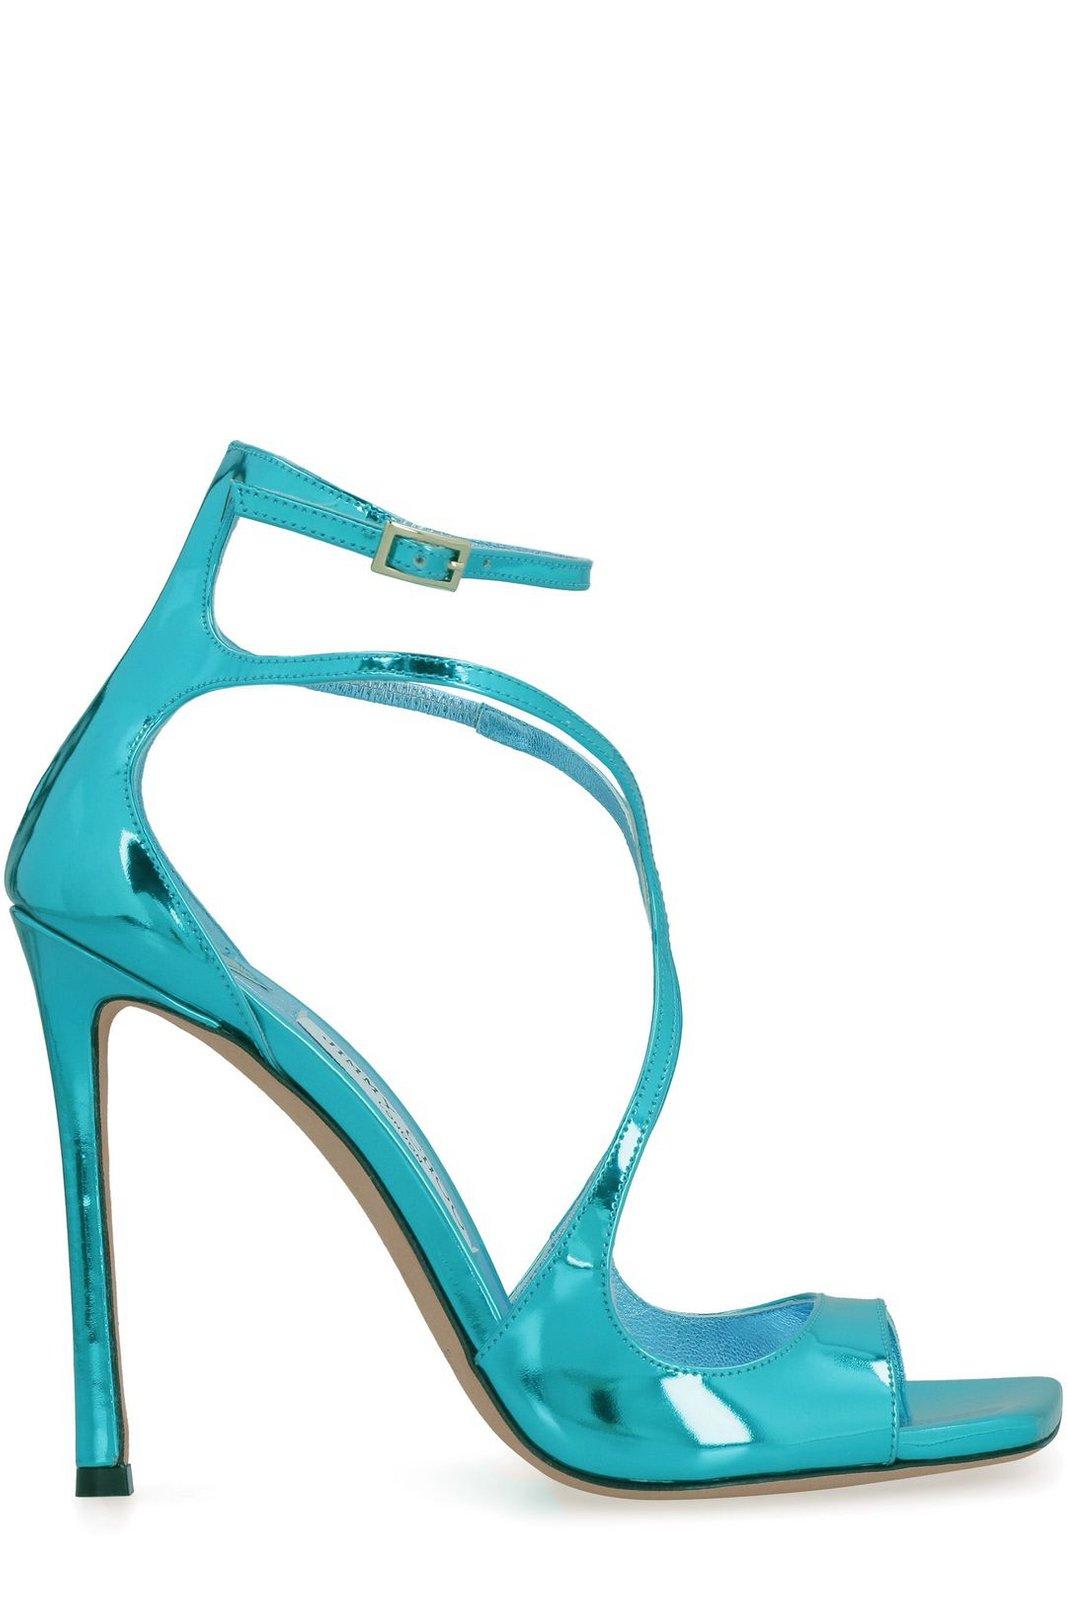 Jimmy Choo Azia 110 Ankle Buckled Sandals